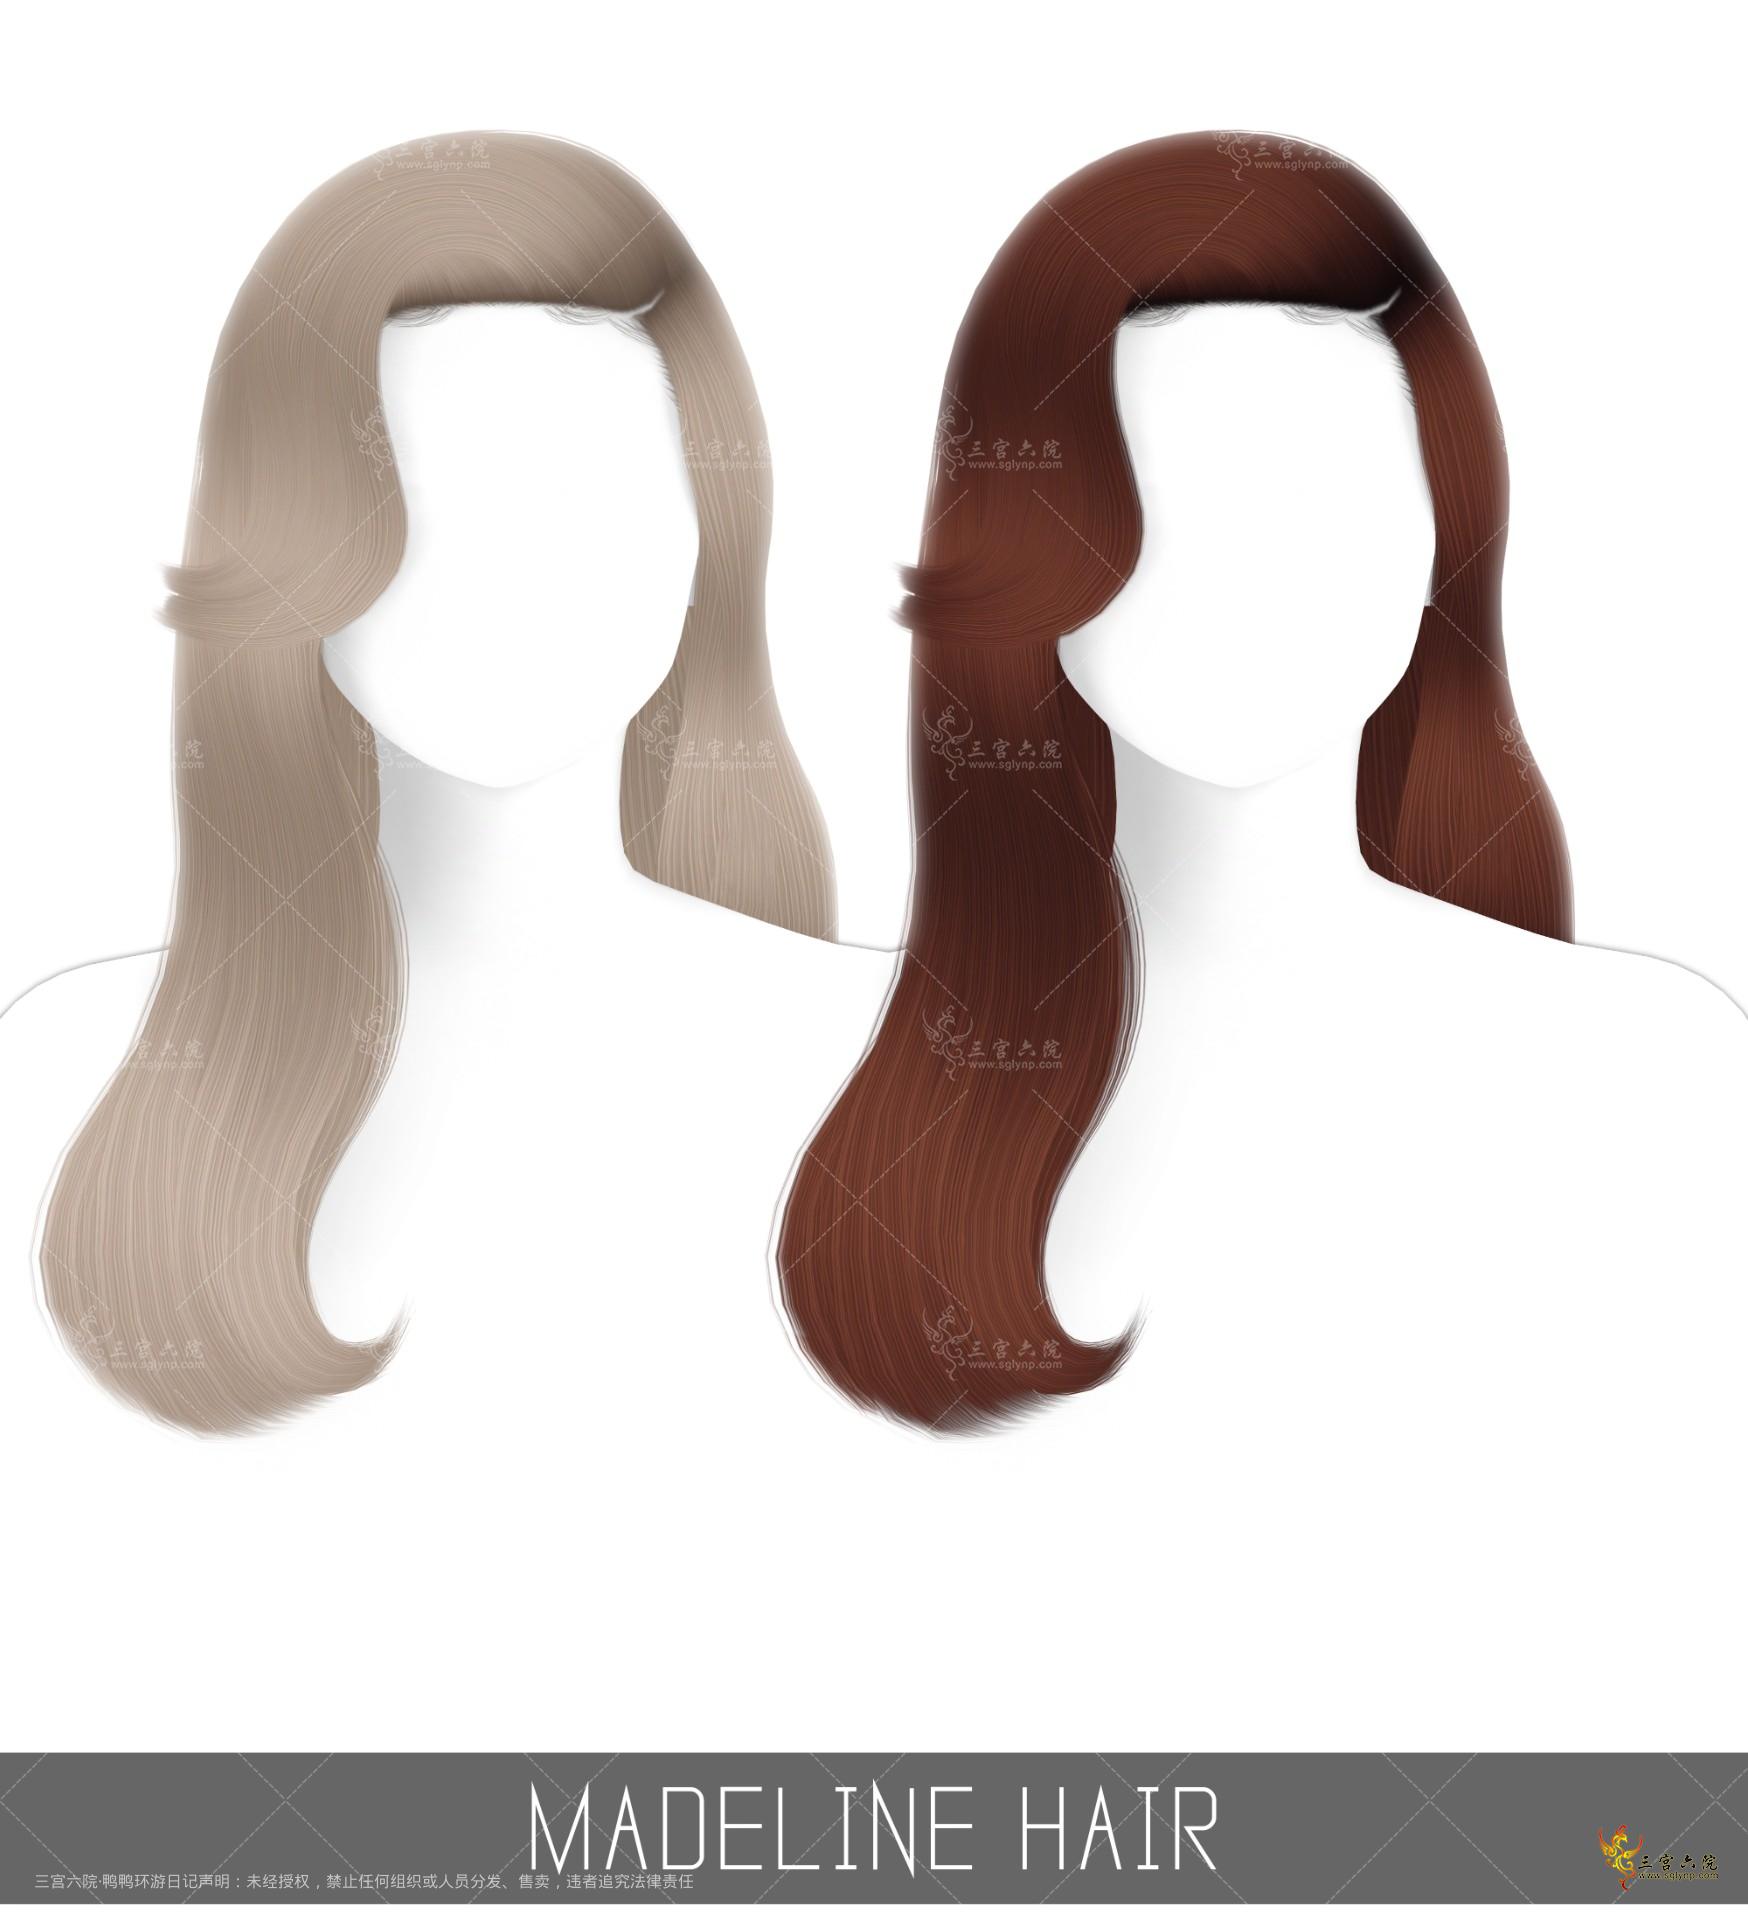 MadelineHair.png